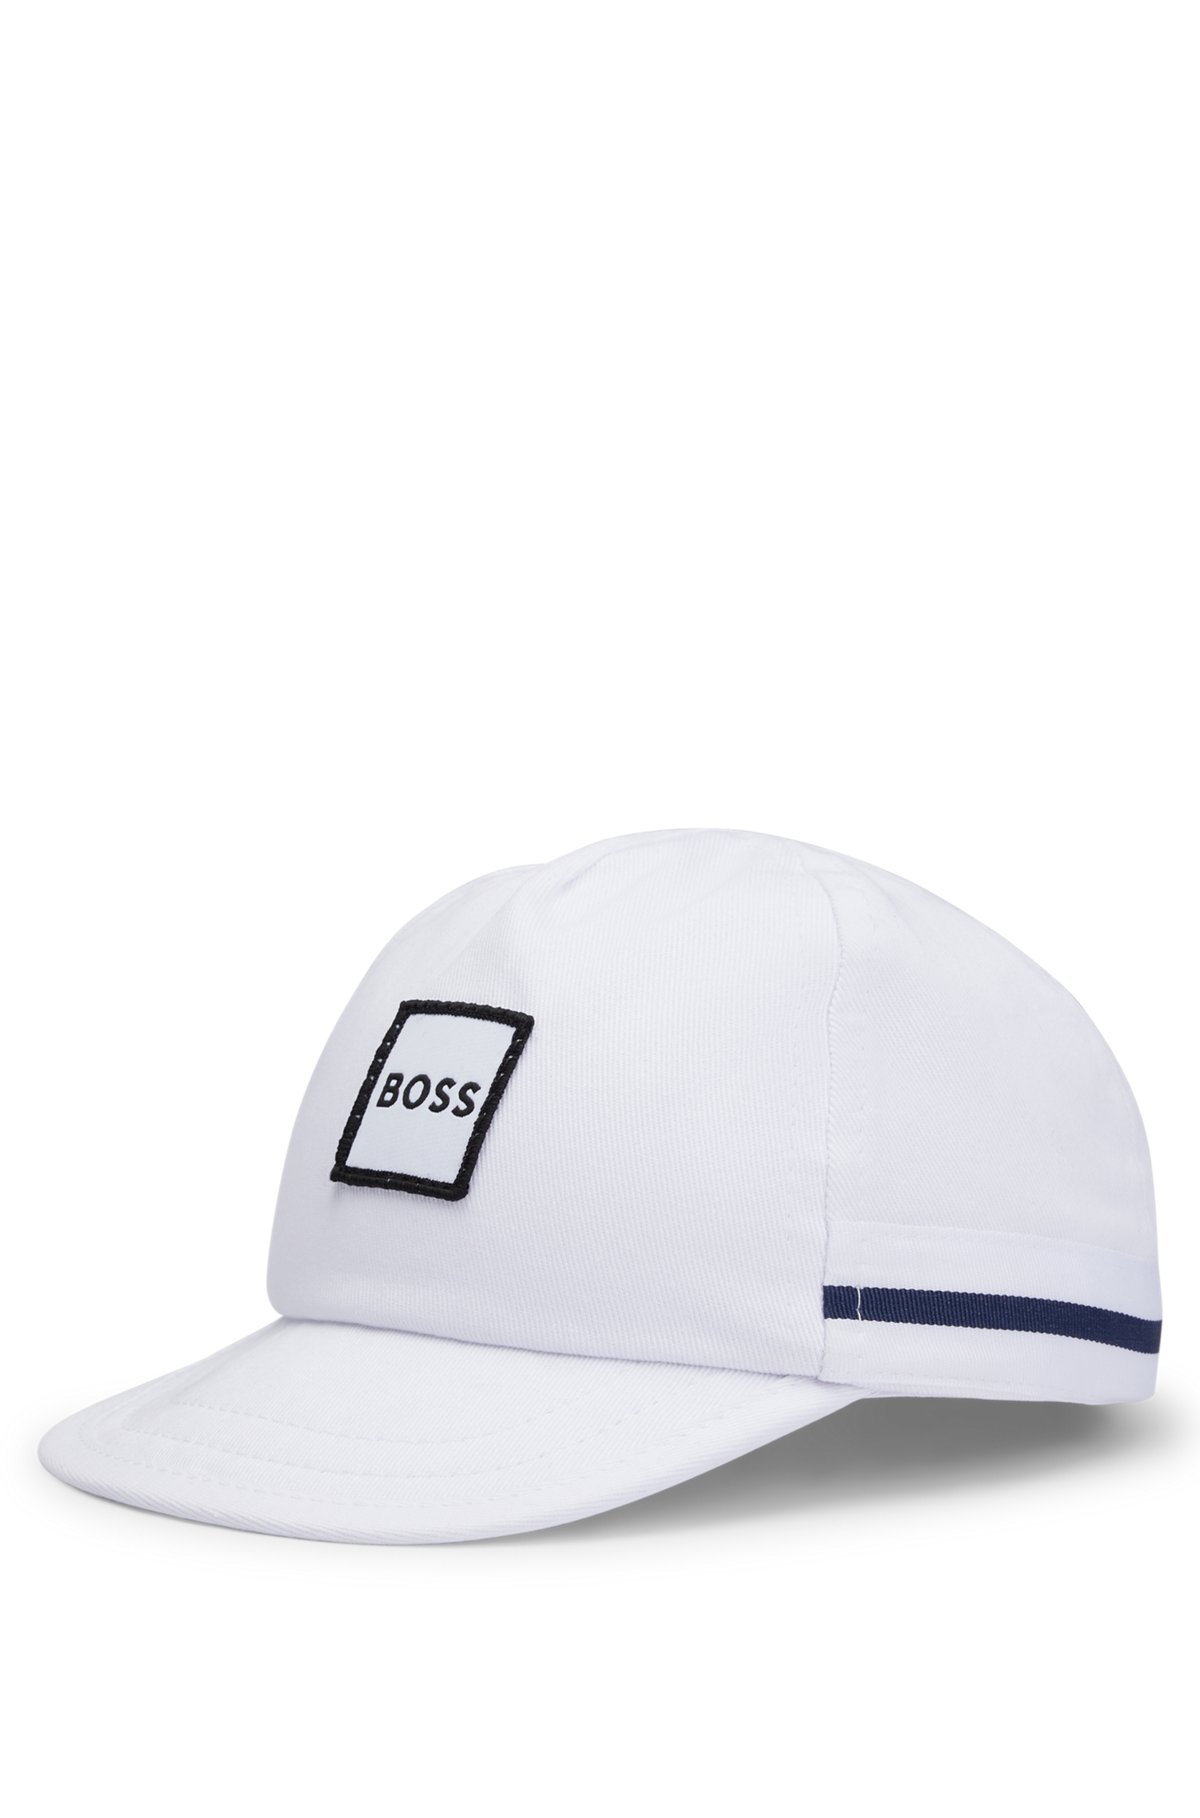 Baby cap in cotton with logo label, White